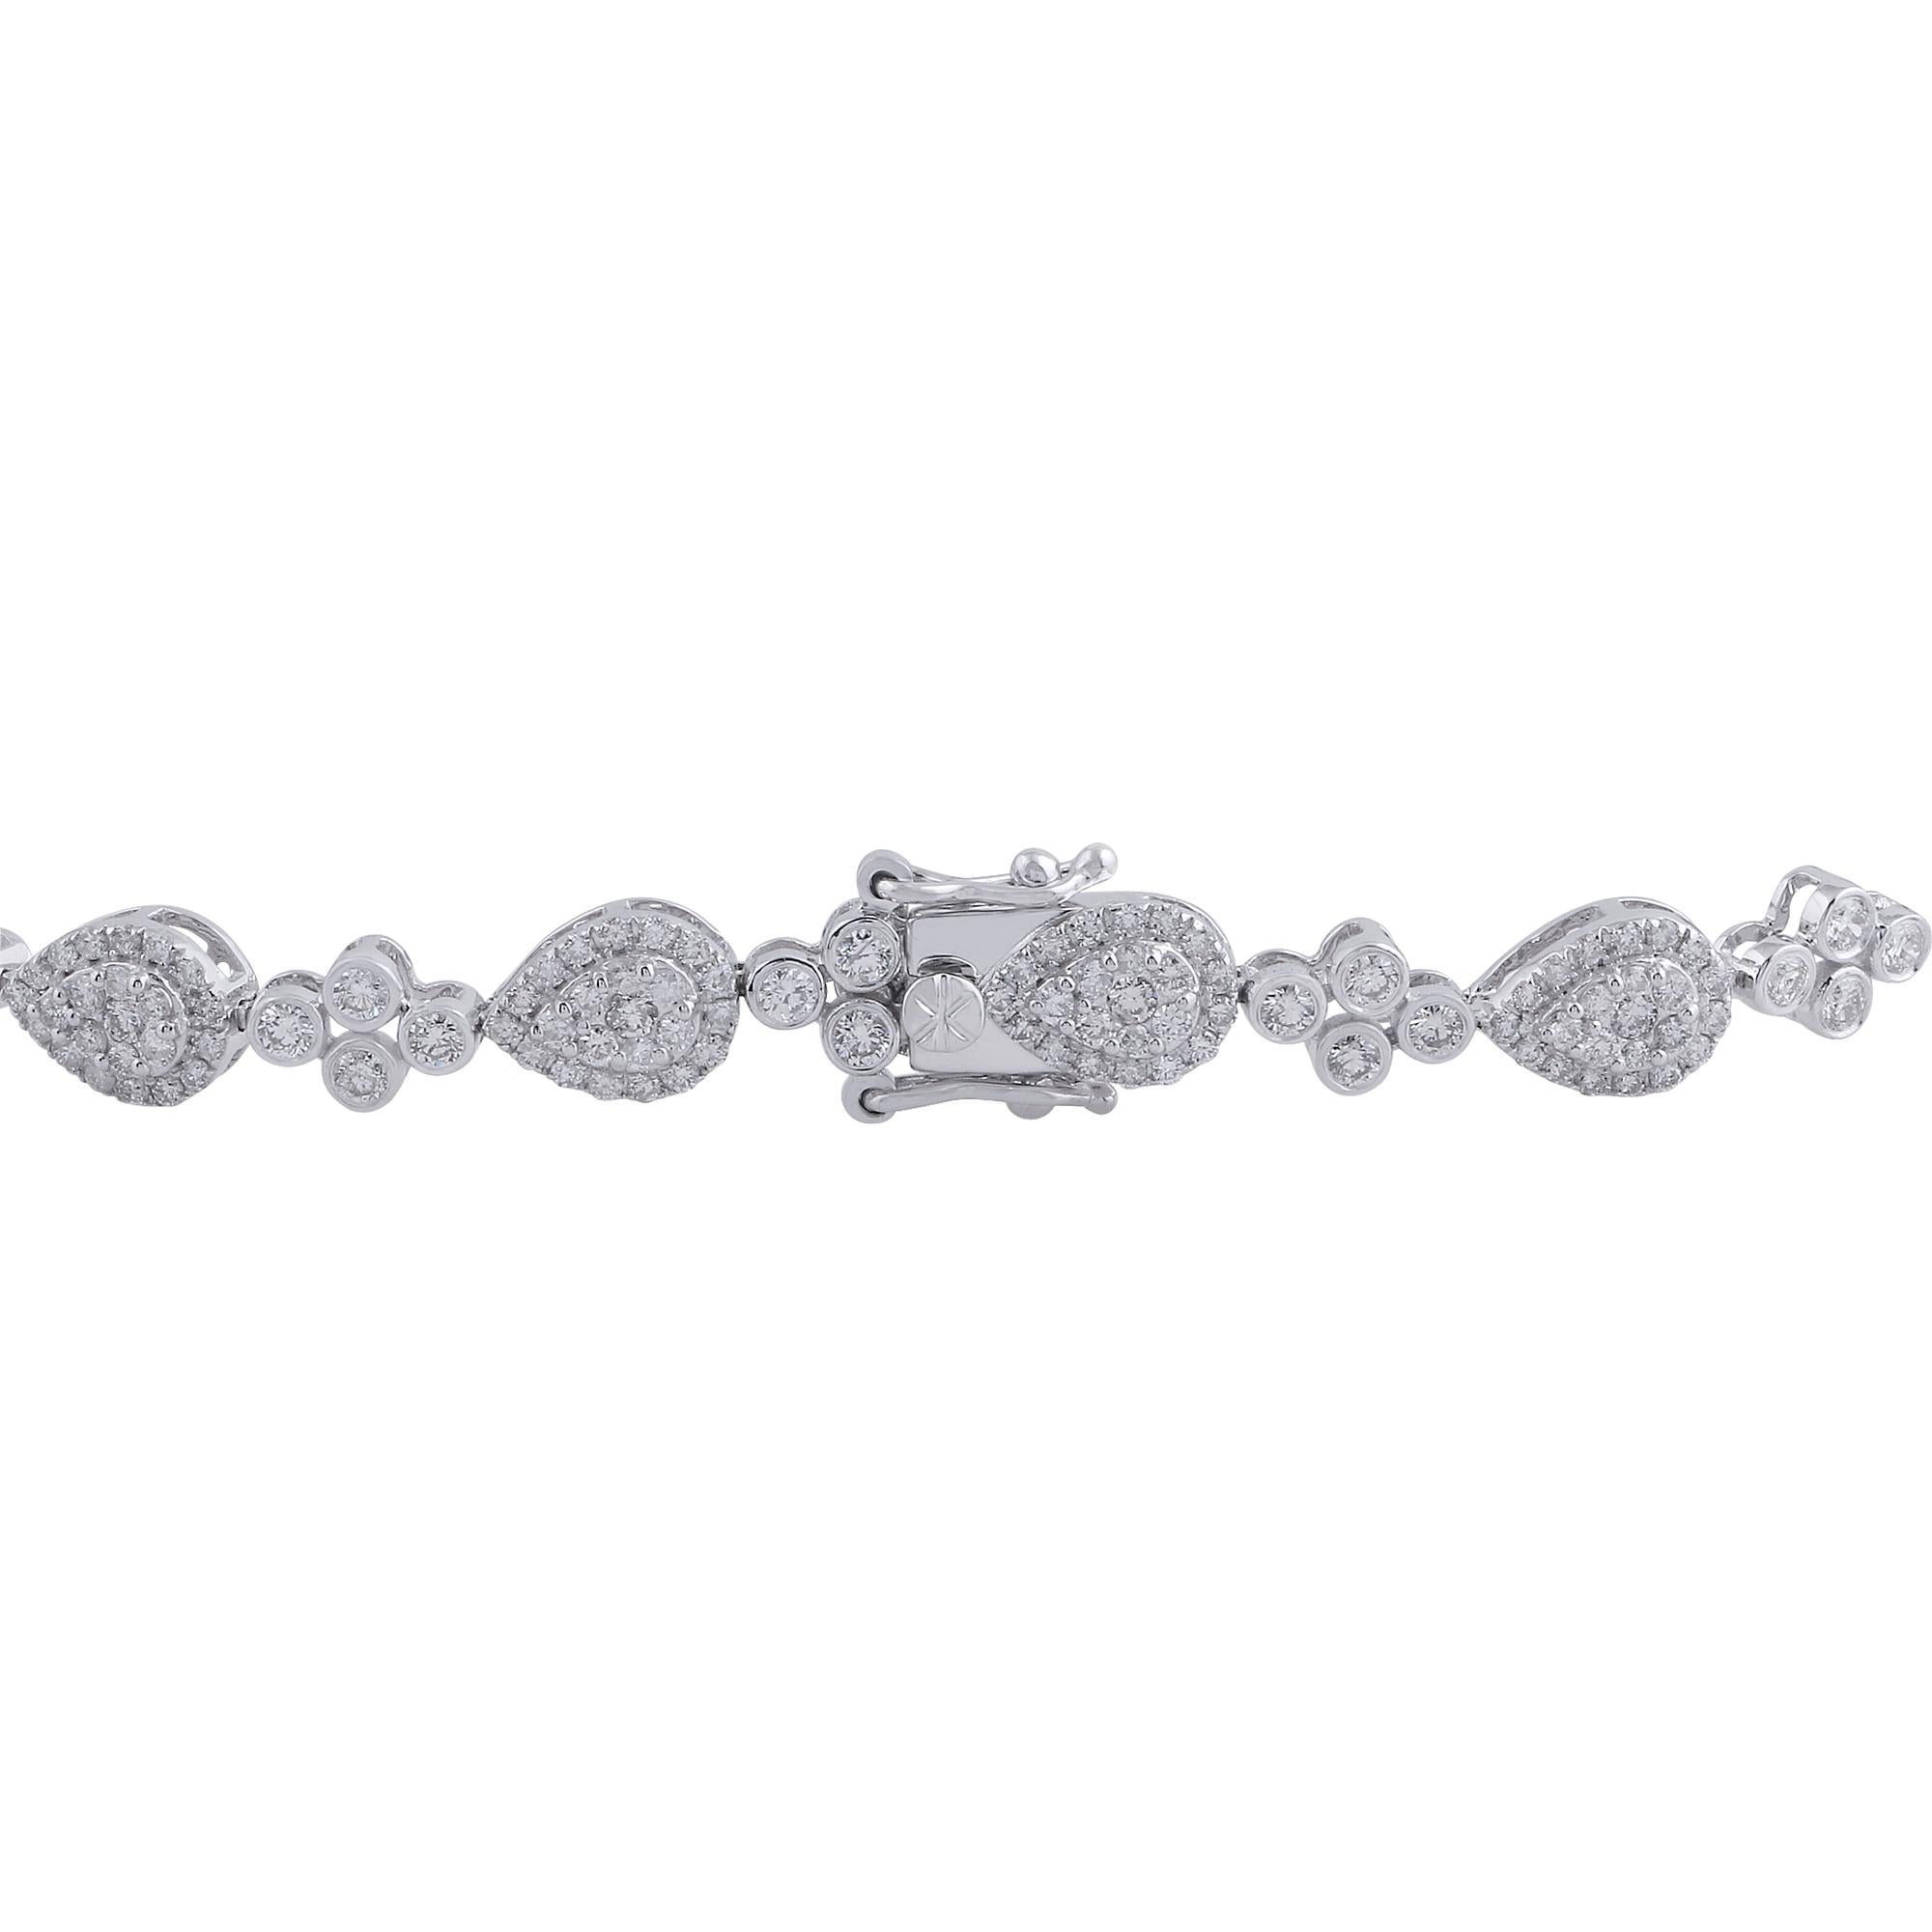 Item Code :- SFBR-4006
Gross Weight :- 12.97 gm
14k White Gold Weight :- 12.29 gm
Diamond Weight :- 3.40 carat  ( AVERAGE DIAMOND CLARITY SI1-SI2 & COLOR H-I )
Bracelet Length :- 7 Inches Long
✦ Sizing
.....................
We can adjust most items